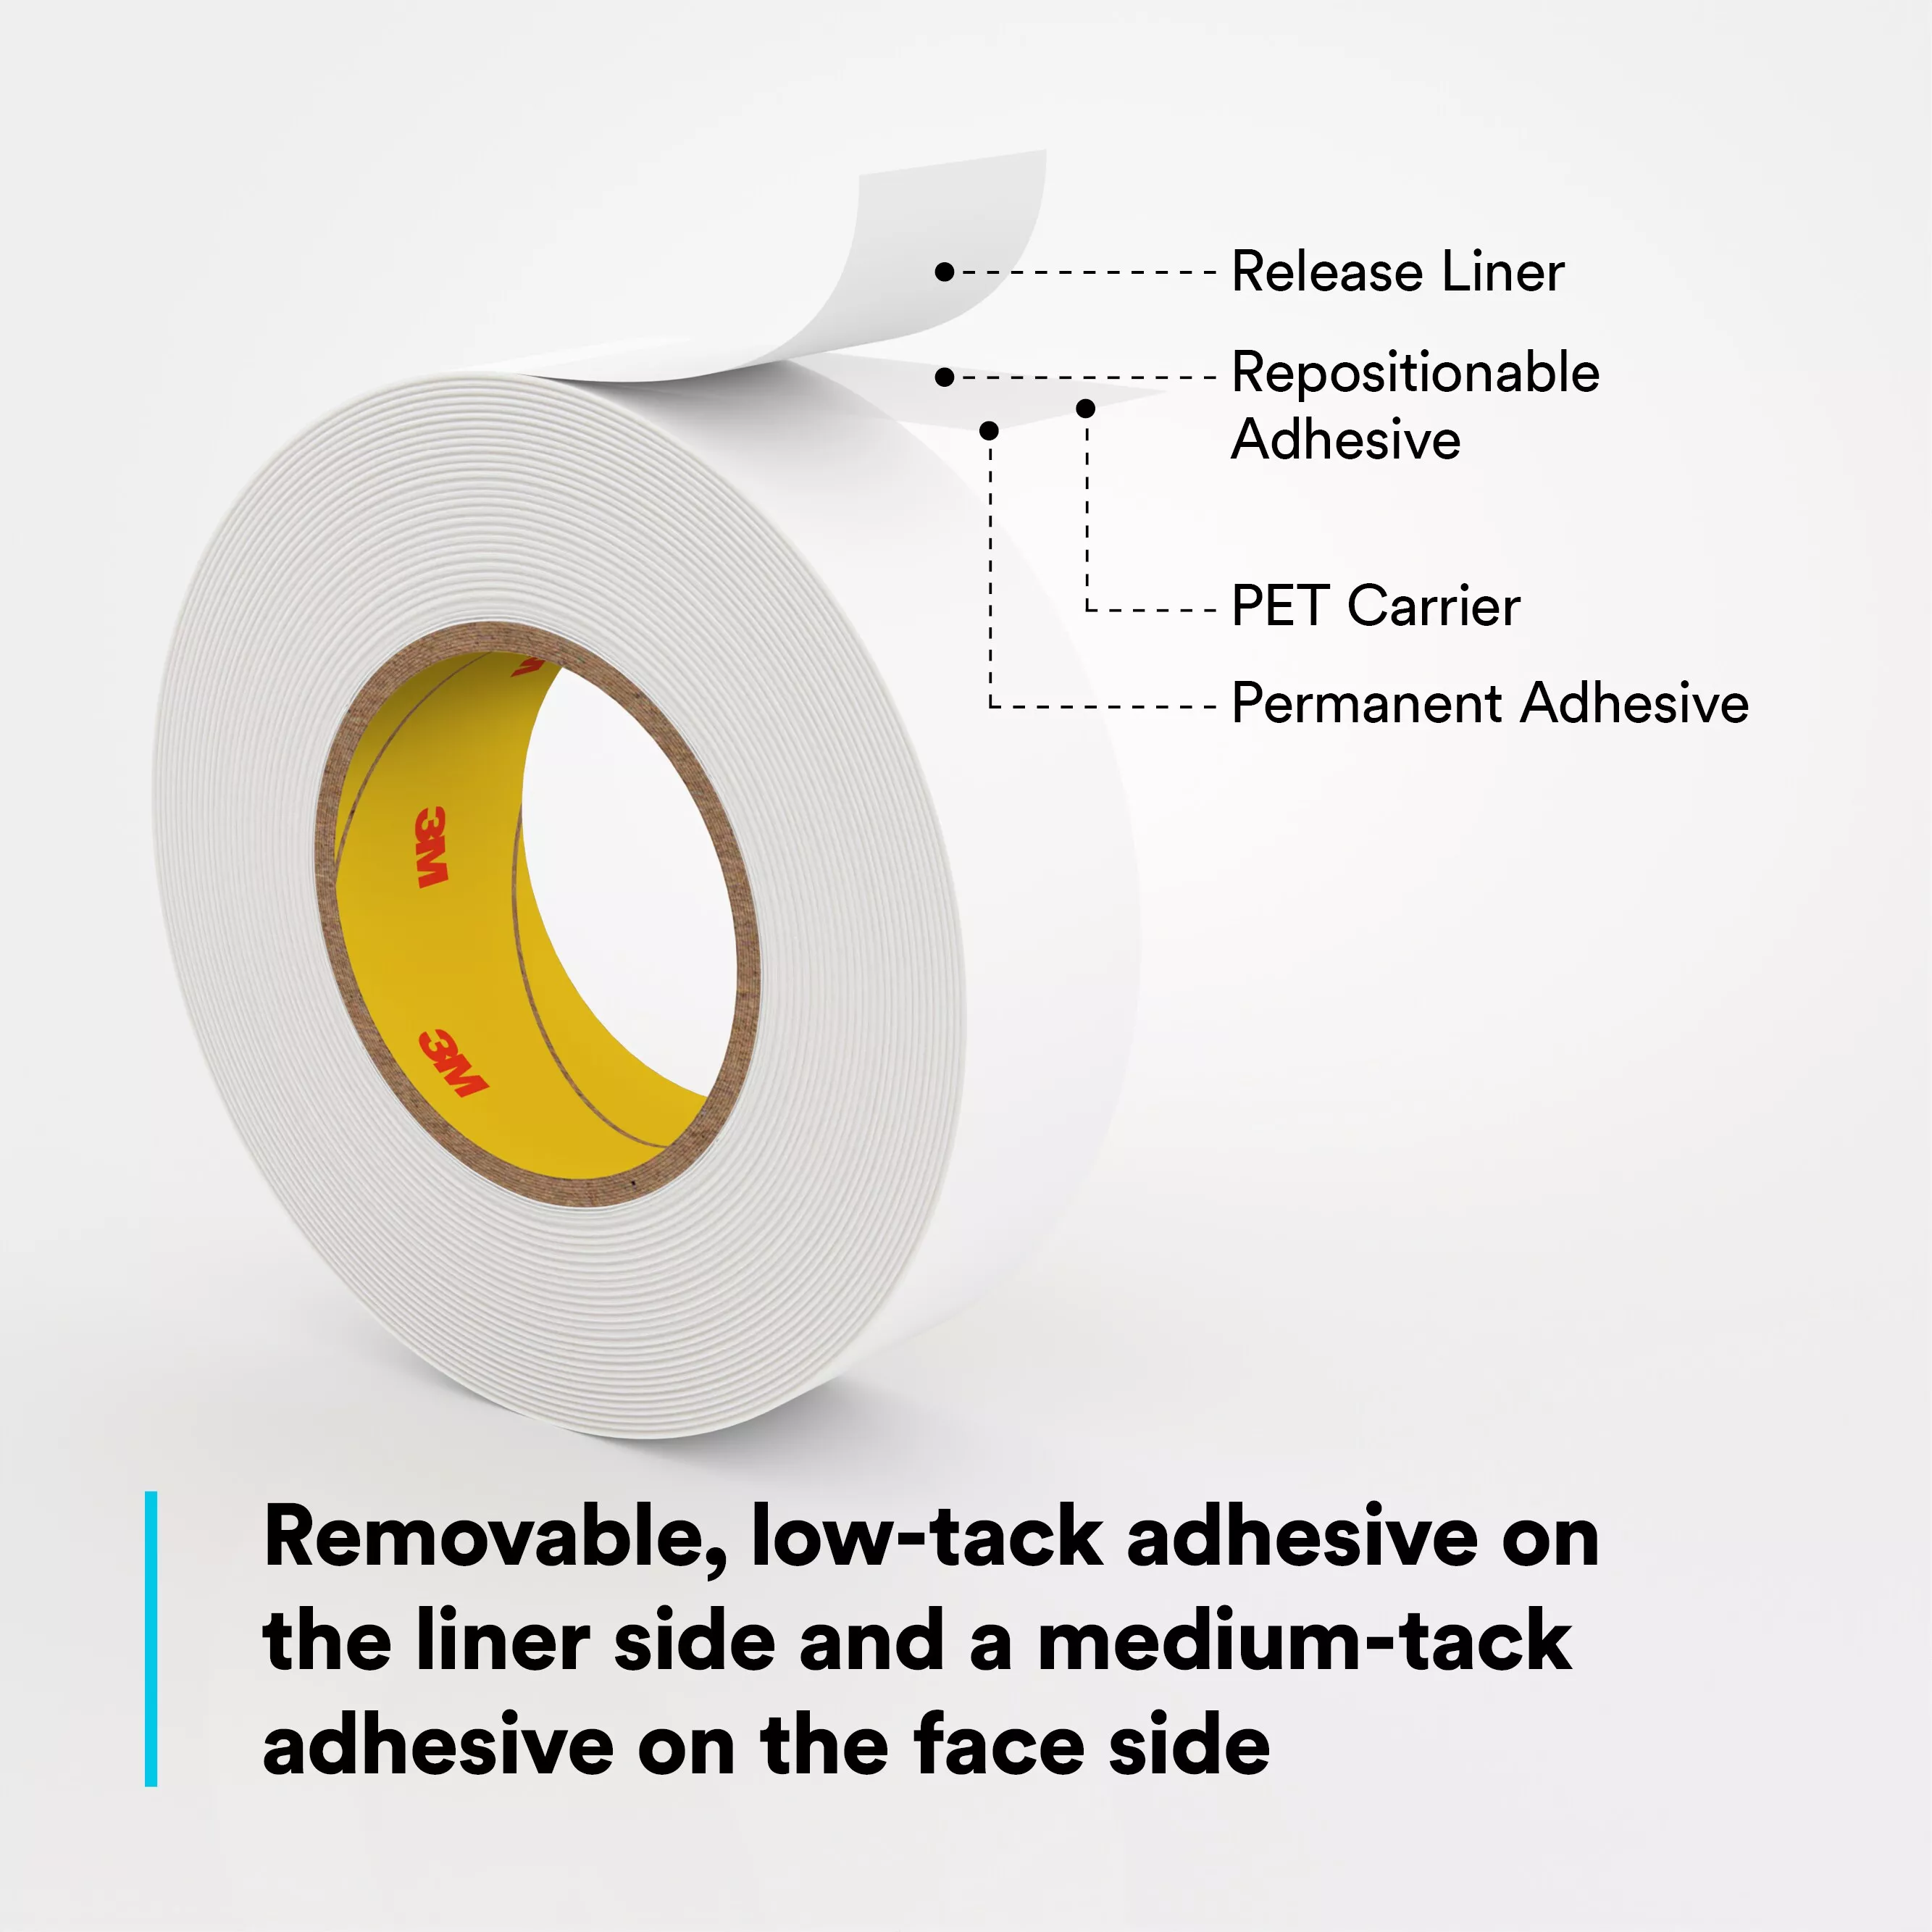 SKU 7010333905 | 3M™ Removable Repositionable Tape 9415PC